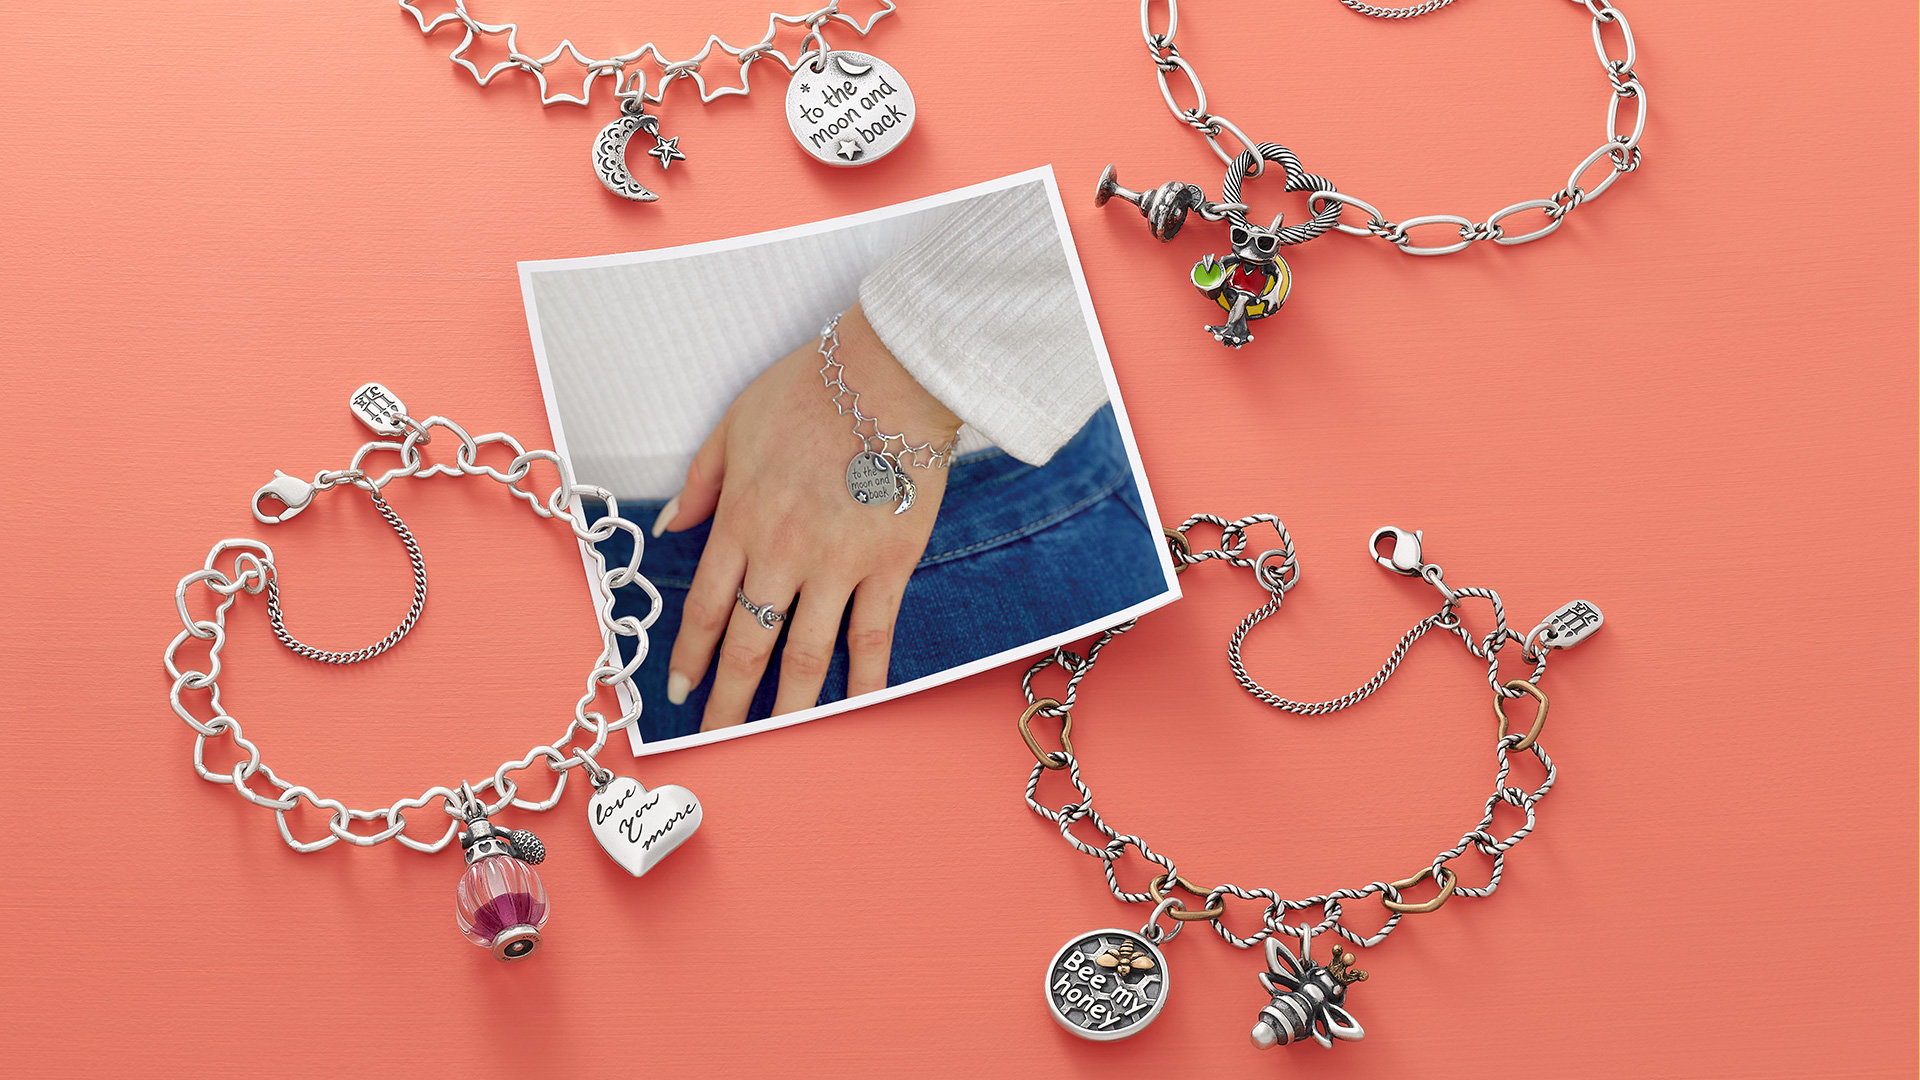 James Avery Artisan Jewelry - Tuesday, June 4, is the LAST DAY to